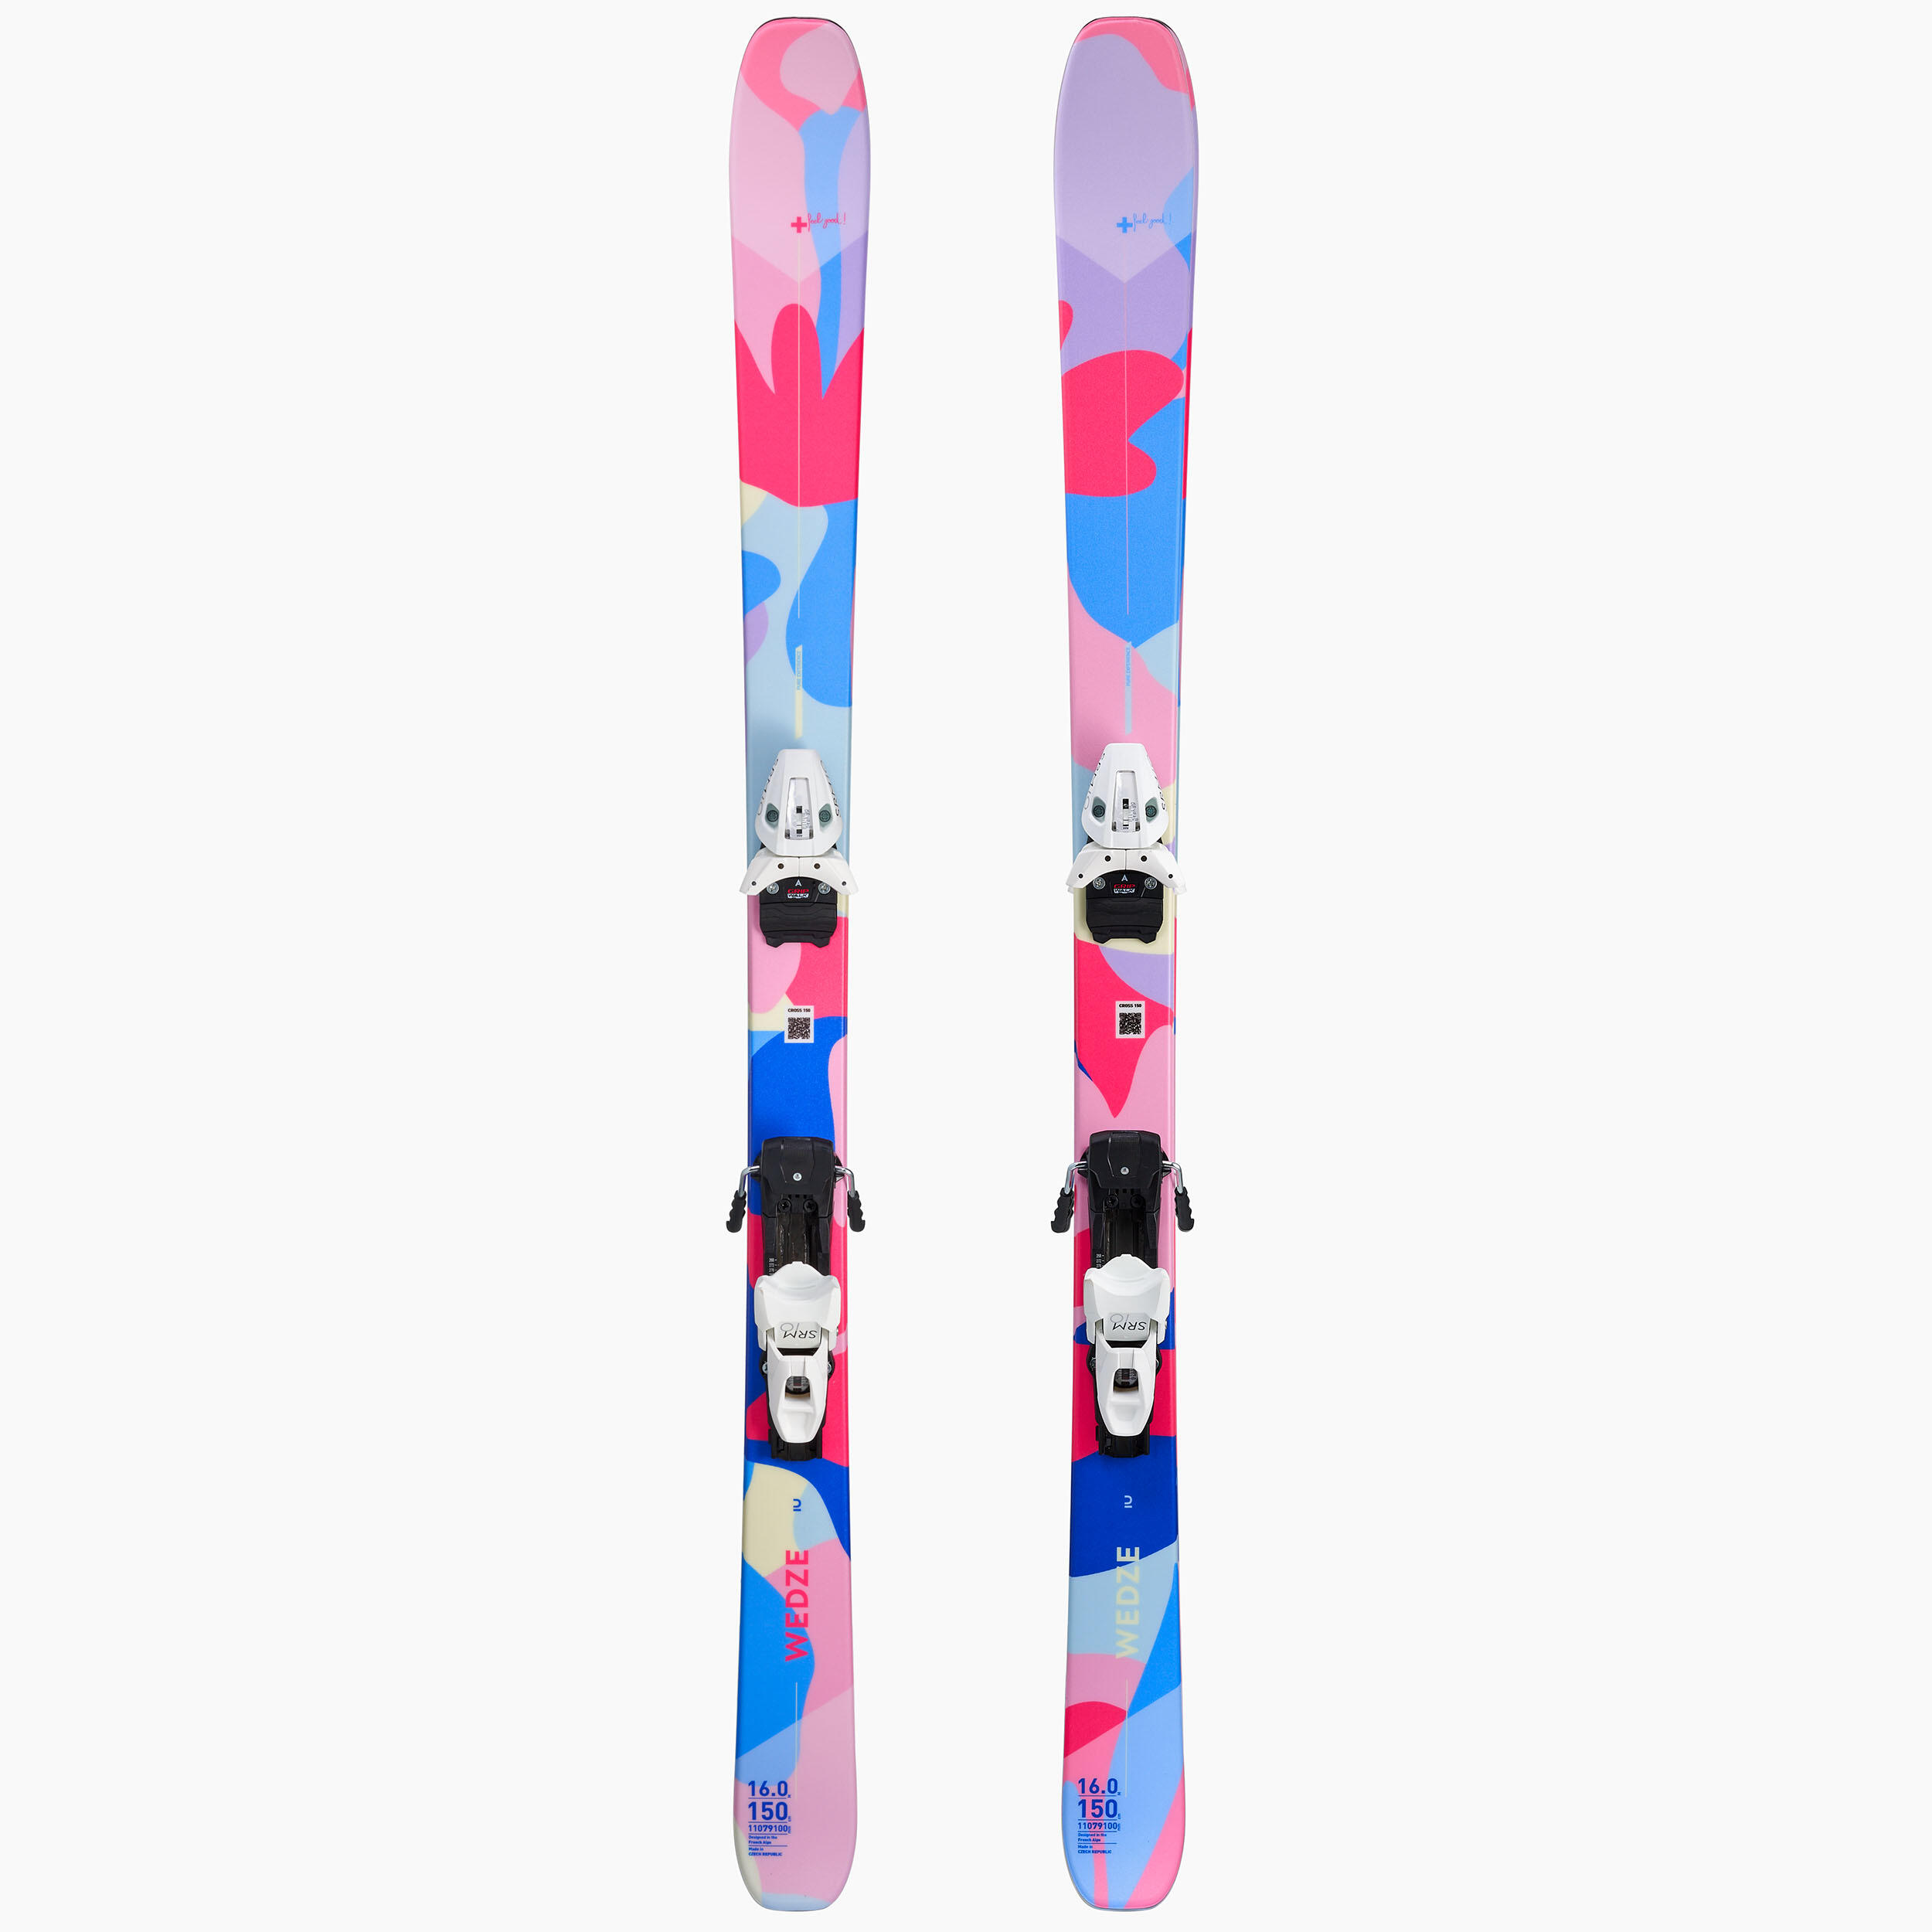 WOMEN'S DOWNHILL SKI WITH BINDINGS - CROSS 150+ FLORAL 11/12